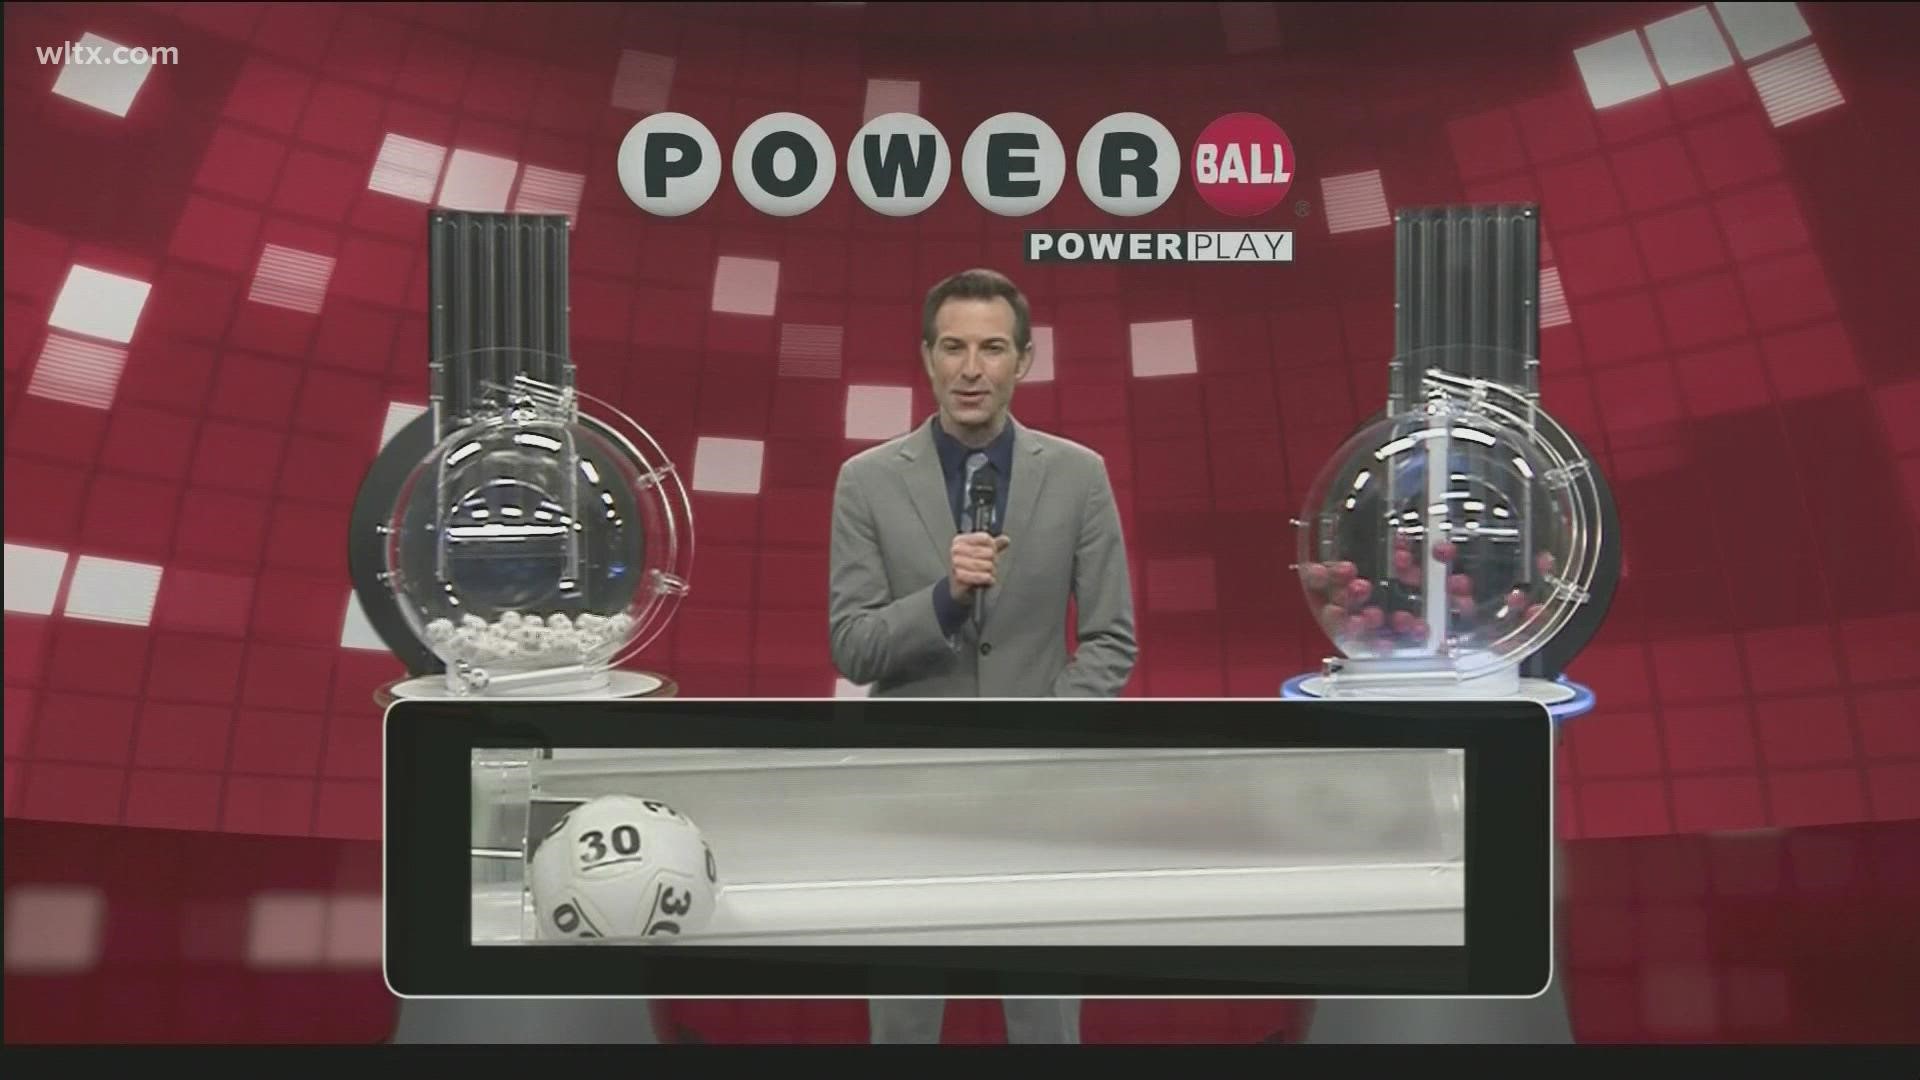 Here are the Powerball winning numbers for October 23, 2021.